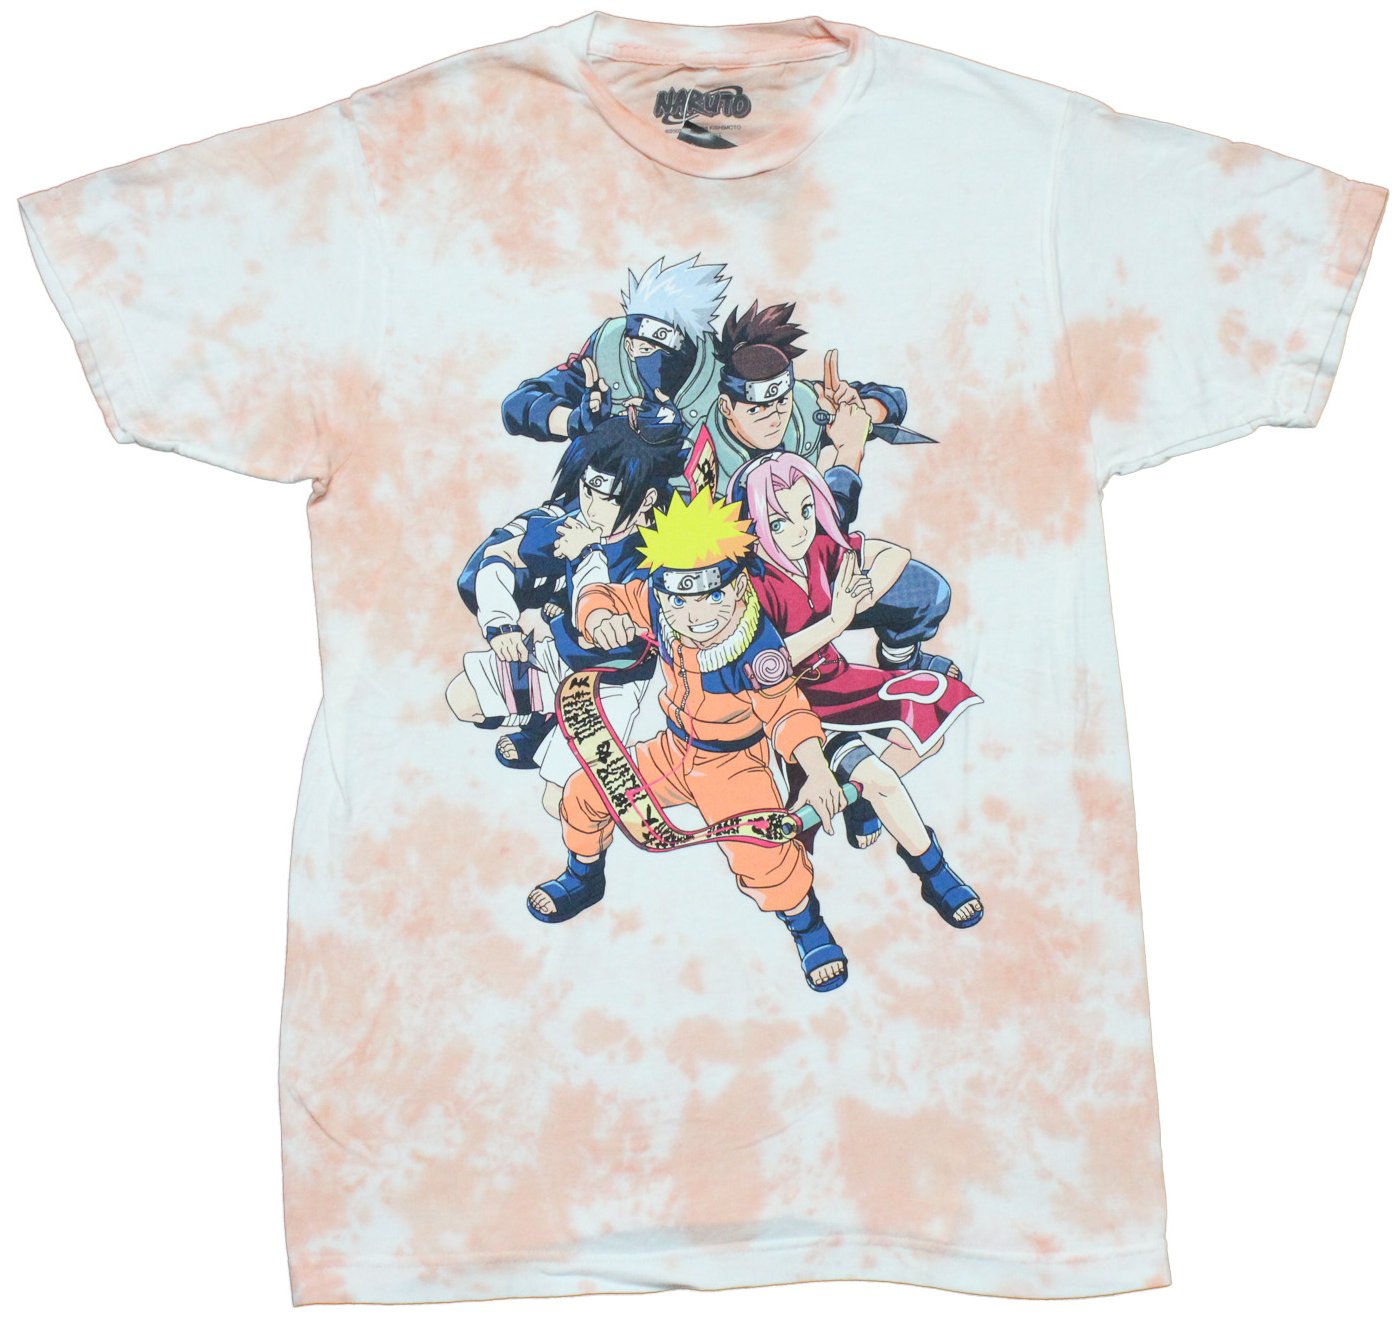 Naruto Shippuden Mens T-Shirt - Large Cast In Fighting Stance Tie Dye